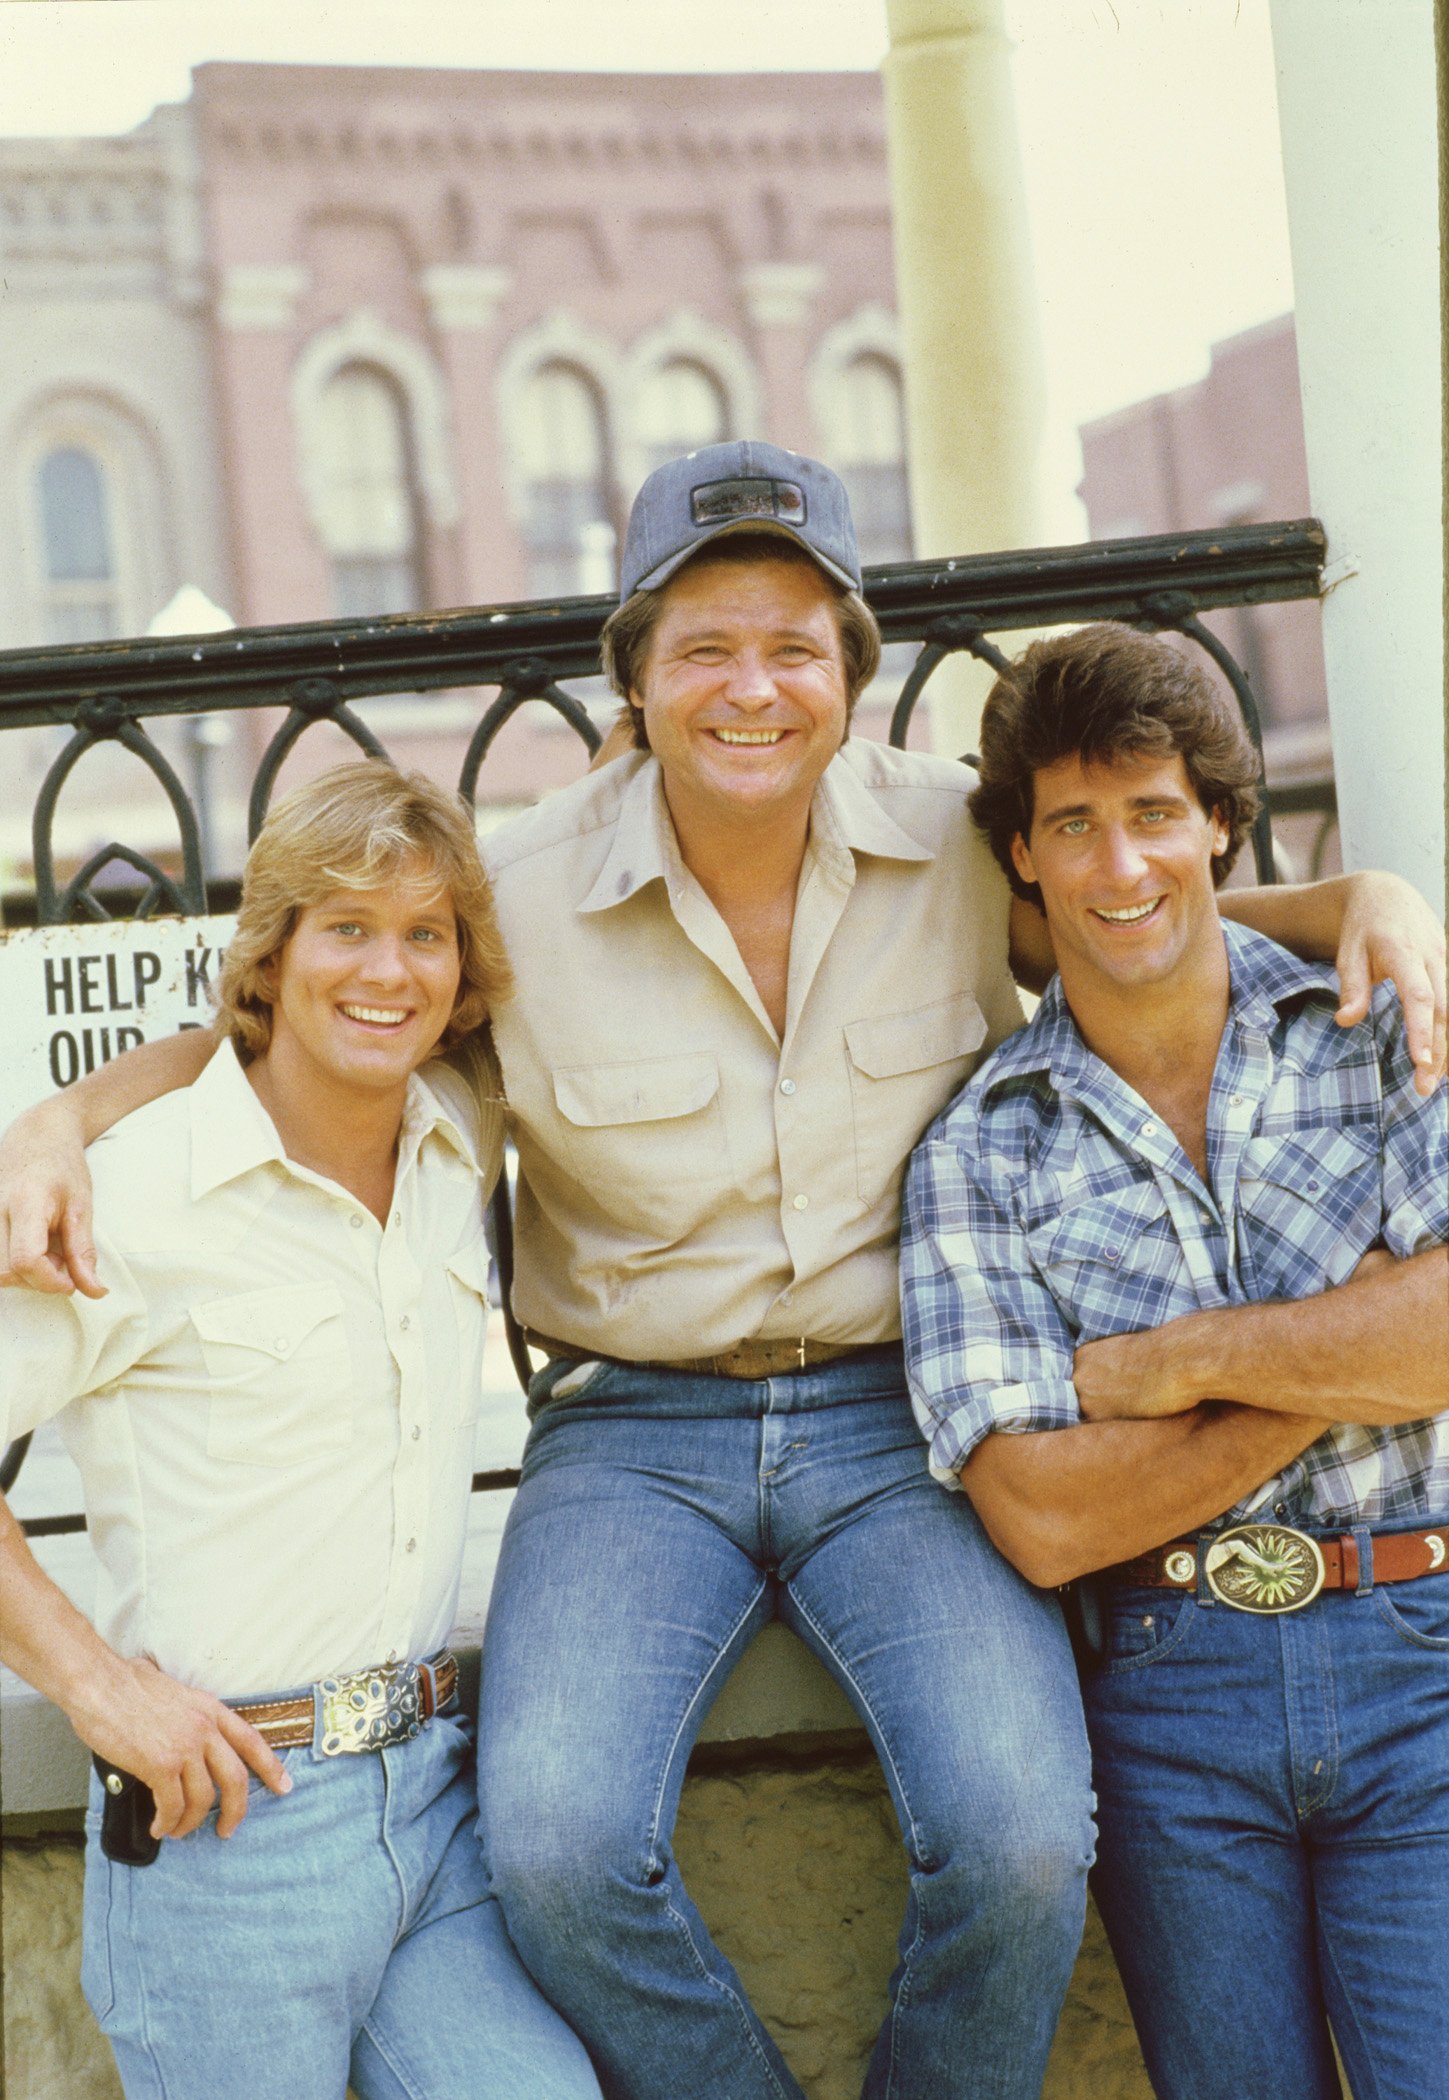 Byron Cherry (as Coy Duke), Ben Jones (as Cooter Davenport) and Christopher Mayer (as Vance Duke) on the set of the television series "The Dukes of Hazzard," in August 1982. | Source: Getty Images.